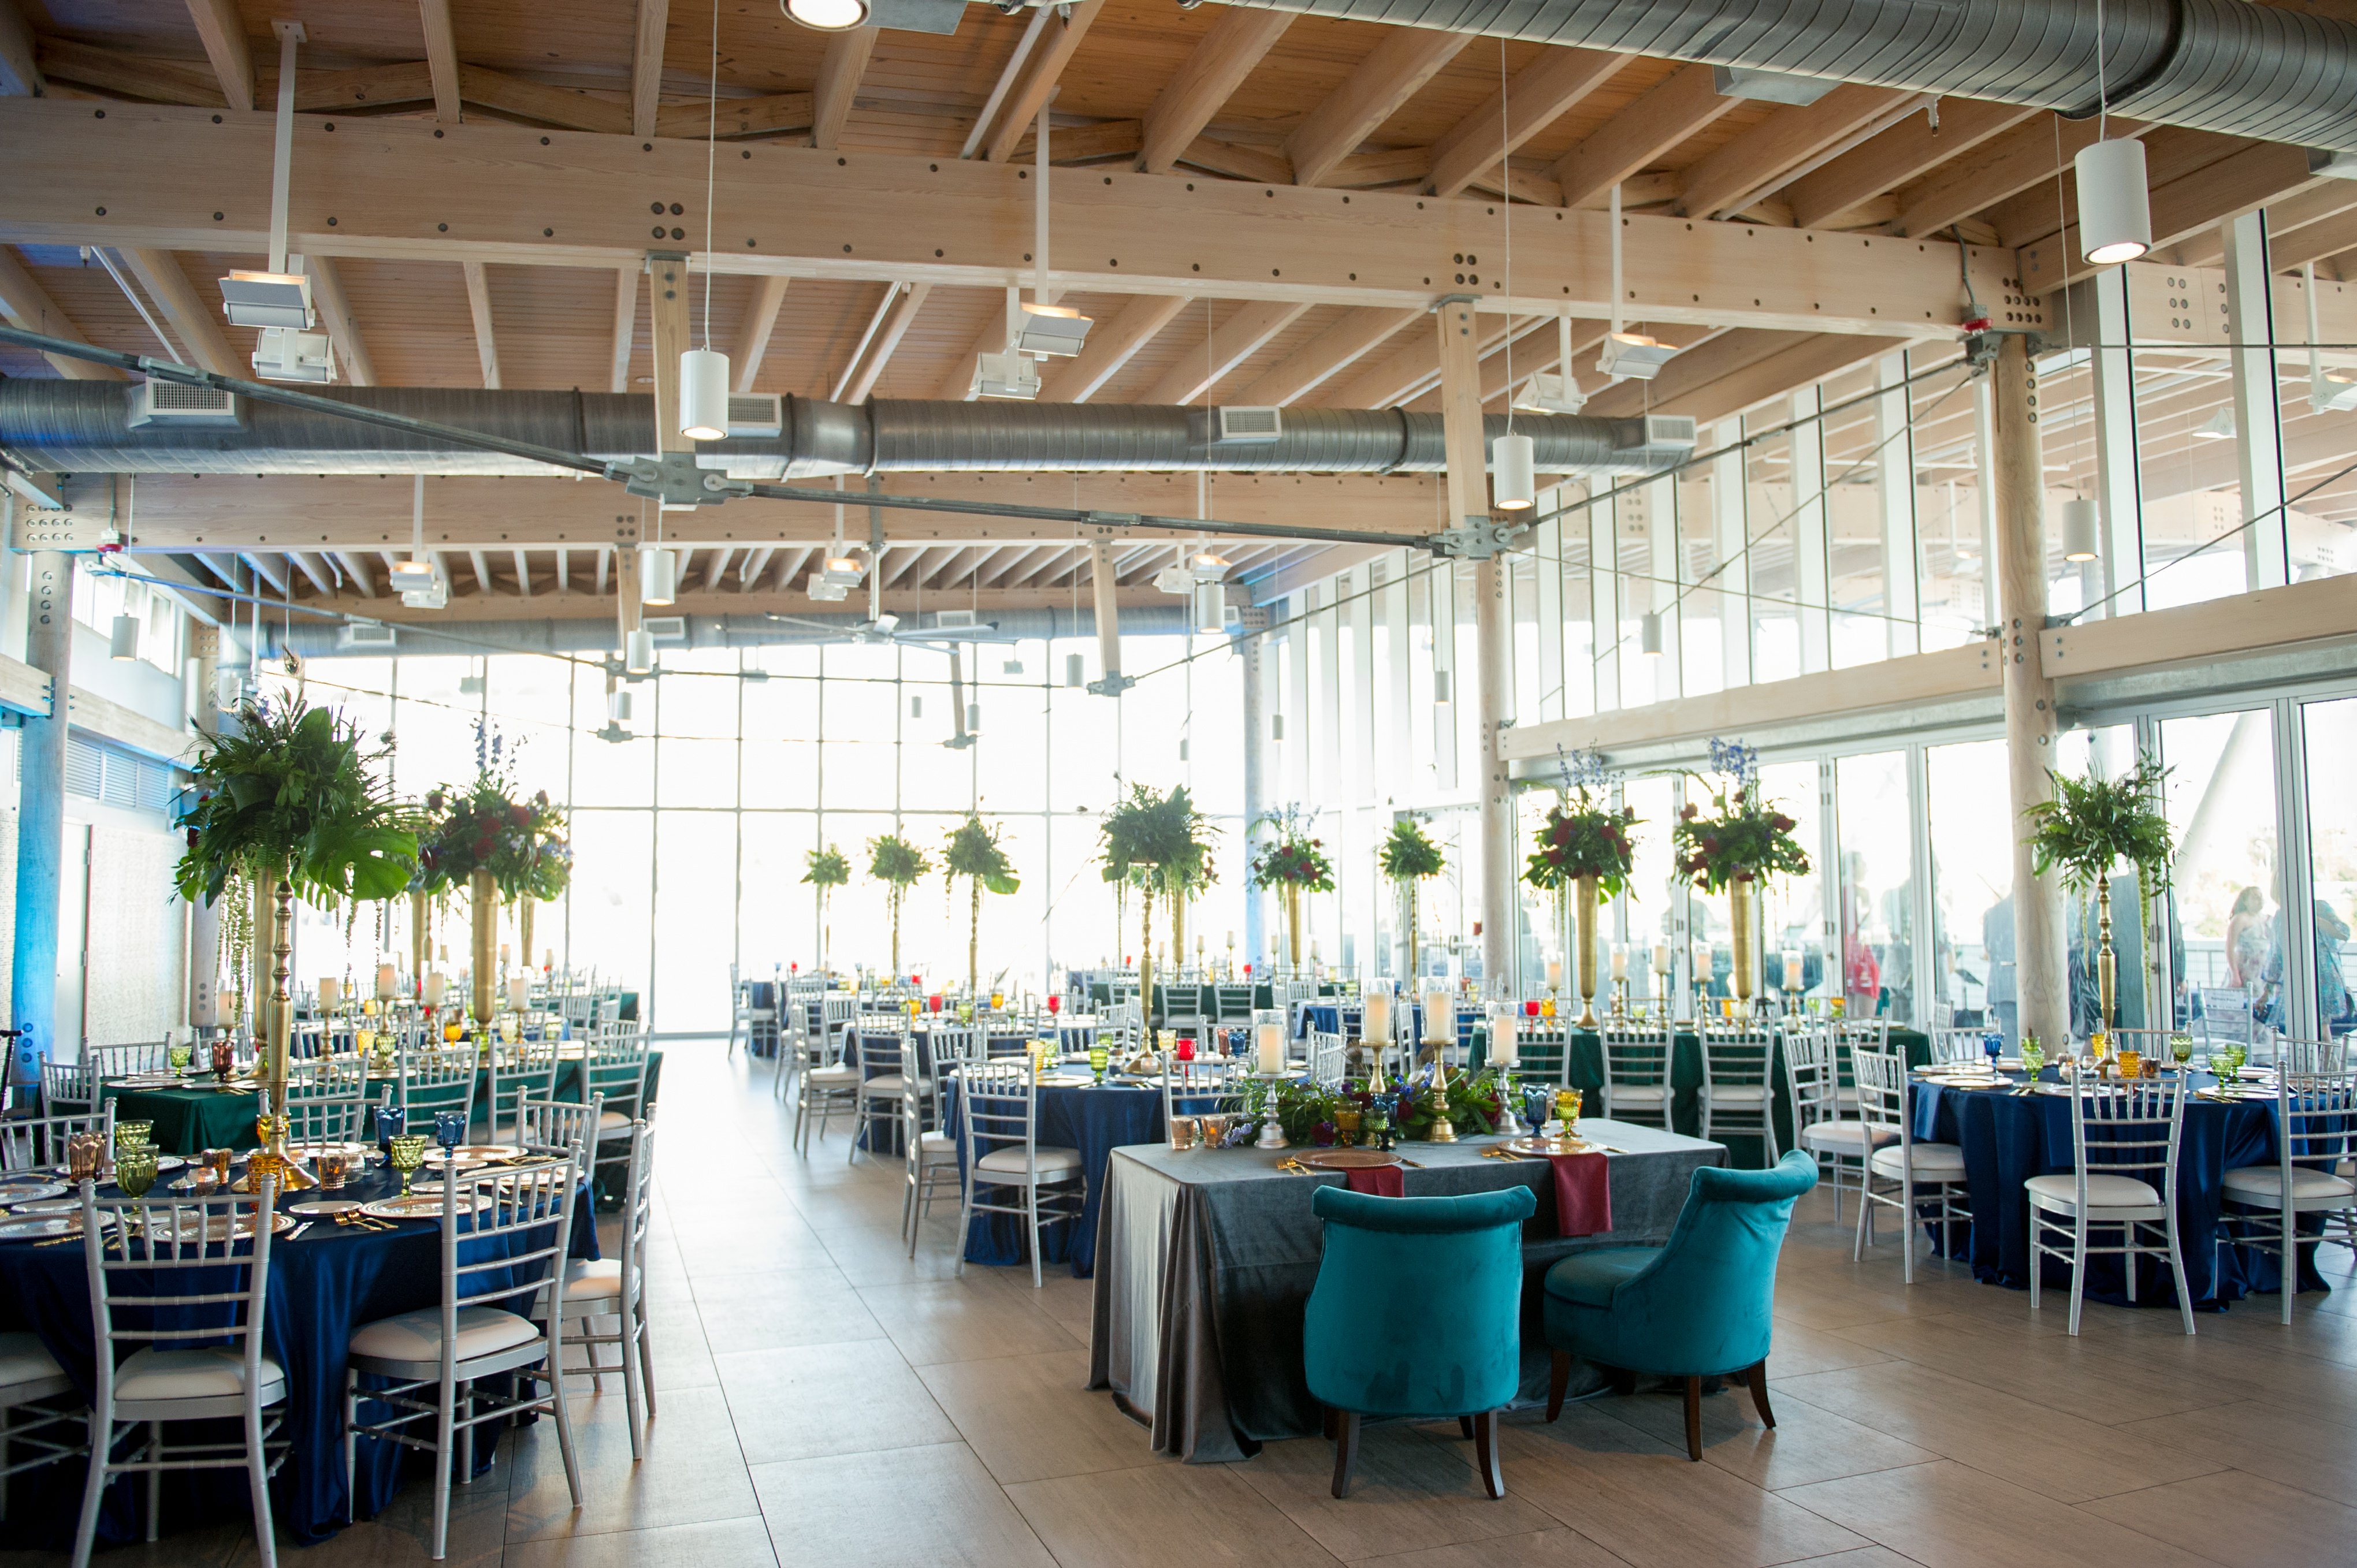 Elegant, Whimsical Eclectic Jewel Toned Themed Reception Wedding Decor at Downtown Tampa Waterfront Reception Venue Tampa Riverwalk, Floor to Ceiling Windows, Large Gold Vase Centerpieces with Overflowing Green Floral Arrangement | Navy Blue Tablecloths with Silver Chairs | Green Velvet Chairs for Sweetheart Table | Tampa Bay Wedding Photographer Andi Diamond Photography